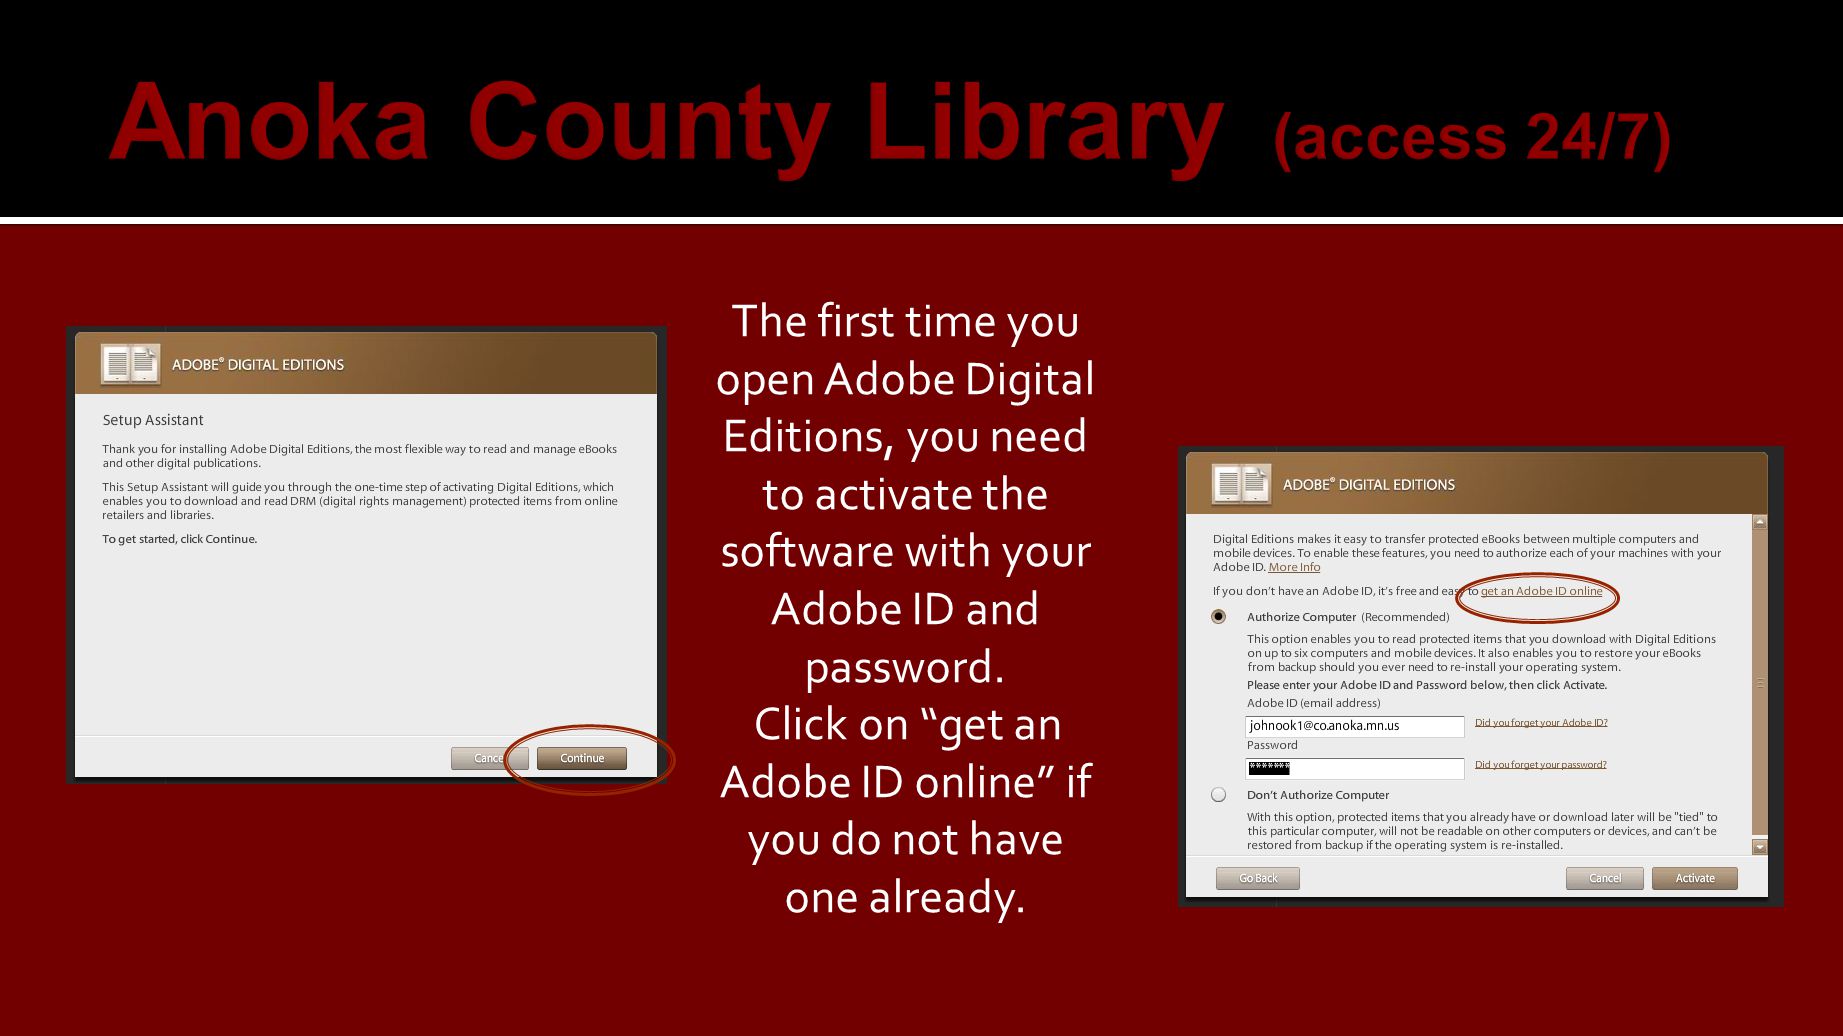 The first time you open Adobe Digital Editions, you need to activate the software with your Adobe ID and password.